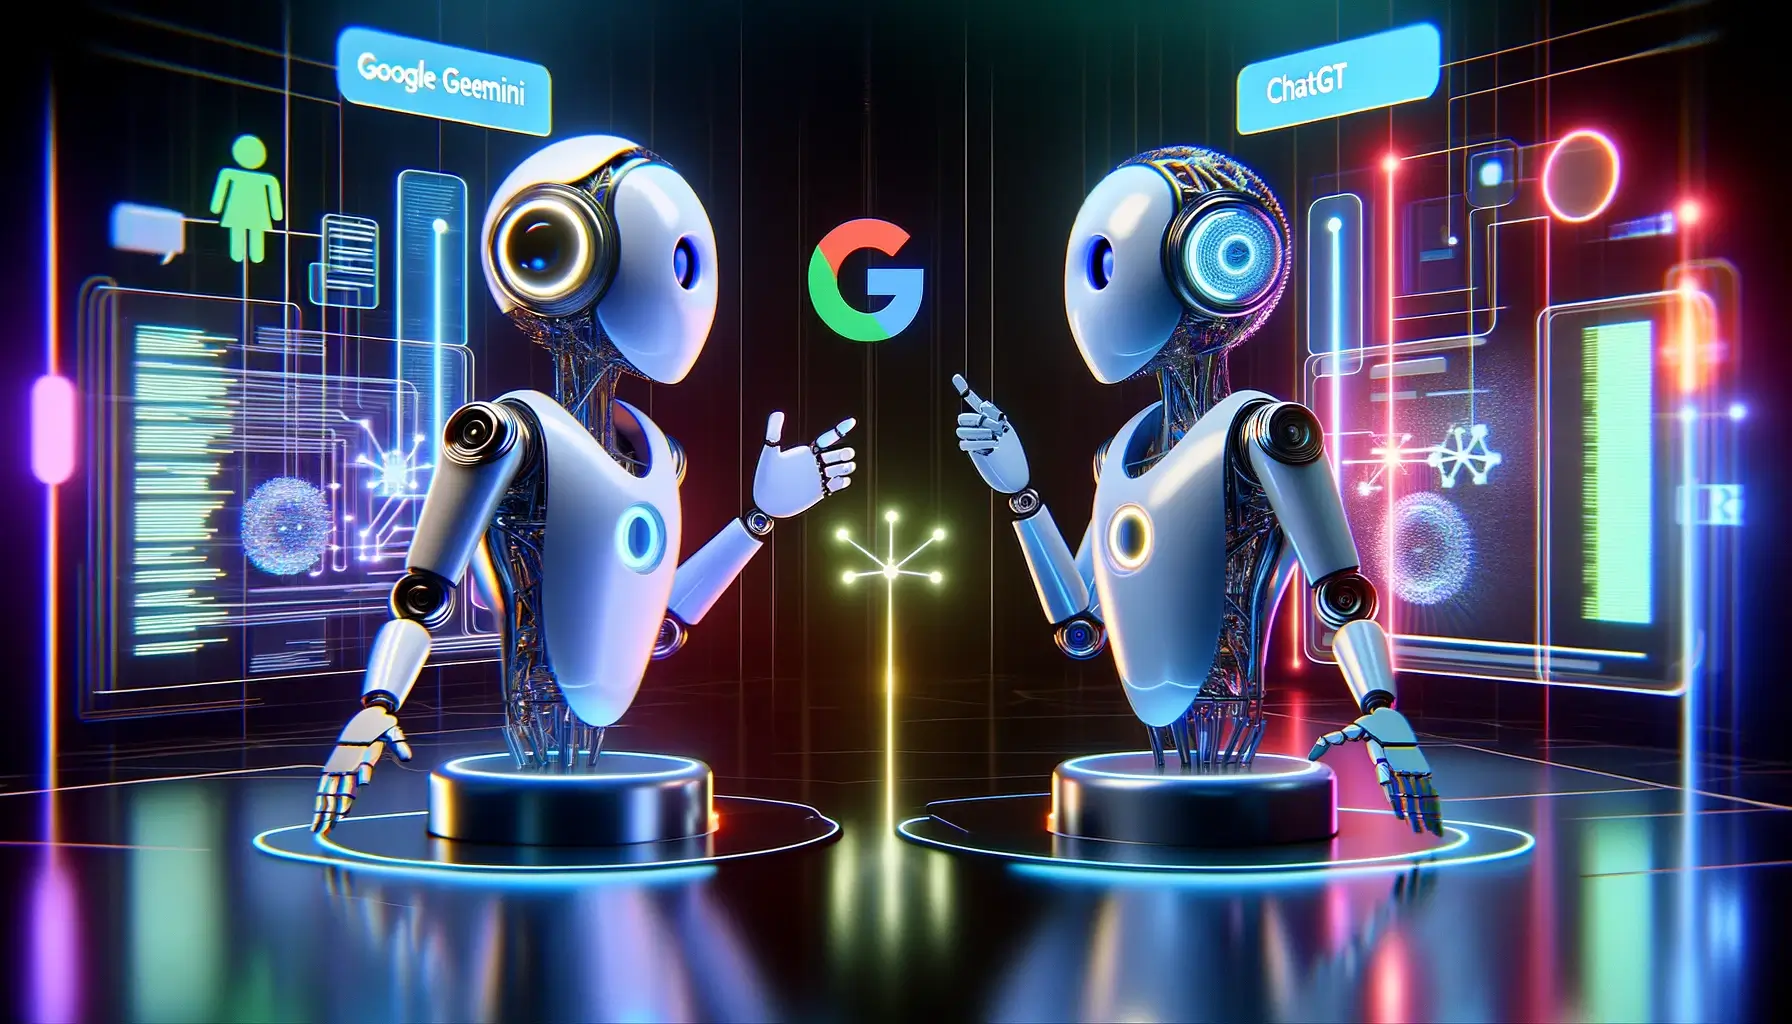 DALL·E 2024 02 09 17.13.49 Imagine a sleek futuristic scene where two chatbot characters one representing Googles Gemini and the other representing ChatGPT are depicted enga 2